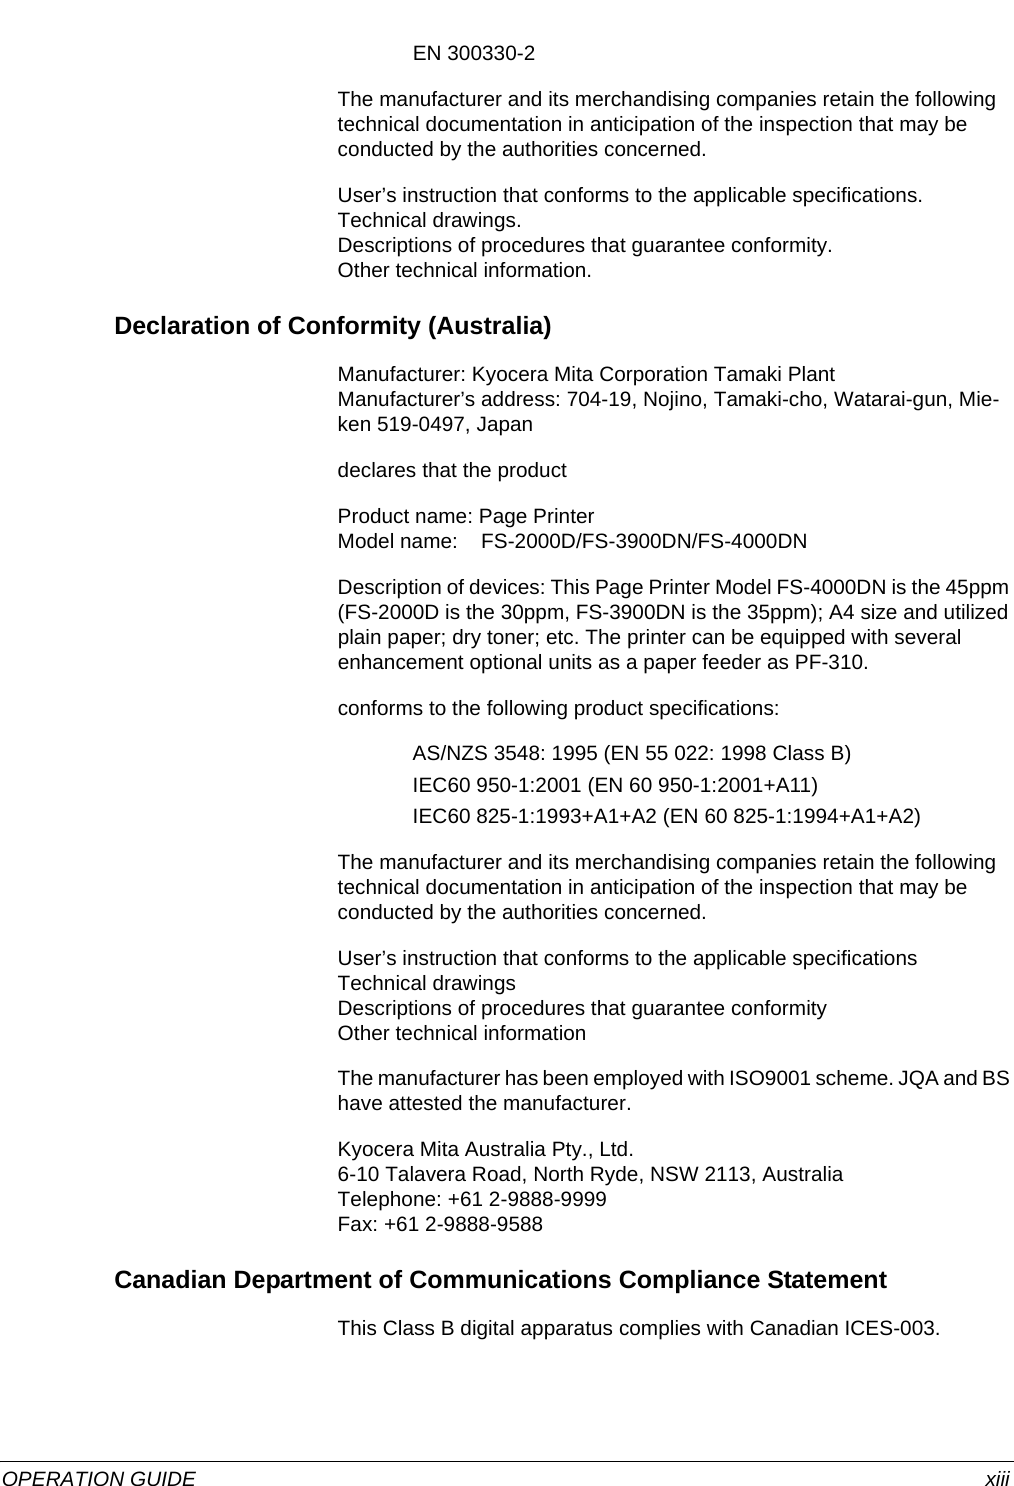  OPERATION GUIDE xiiiEN 300330-2The manufacturer and its merchandising companies retain the following technical documentation in anticipation of the inspection that may be conducted by the authorities concerned.User’s instruction that conforms to the applicable specifications.Technical drawings.Descriptions of procedures that guarantee conformity.Other technical information.Declaration of Conformity (Australia)Manufacturer: Kyocera Mita Corporation Tamaki PlantManufacturer’s address: 704-19, Nojino, Tamaki-cho, Watarai-gun, Mie-ken 519-0497, Japandeclares that the productProduct name: Page PrinterModel name:    FS-2000D/FS-3900DN/FS-4000DNDescription of devices: This Page Printer Model FS-4000DN is the 45ppm (FS-2000D is the 30ppm, FS-3900DN is the 35ppm); A4 size and utilized plain paper; dry toner; etc. The printer can be equipped with several enhancement optional units as a paper feeder as PF-310.conforms to the following product specifications:AS/NZS 3548: 1995 (EN 55 022: 1998 Class B)IEC60 950-1:2001 (EN 60 950-1:2001+A11)IEC60 825-1:1993+A1+A2 (EN 60 825-1:1994+A1+A2)The manufacturer and its merchandising companies retain the following technical documentation in anticipation of the inspection that may be conducted by the authorities concerned.User’s instruction that conforms to the applicable specificationsTechnical drawingsDescriptions of procedures that guarantee conformityOther technical informationThe manufacturer has been employed with ISO9001 scheme. JQA and BS have attested the manufacturer.Kyocera Mita Australia Pty., Ltd.6-10 Talavera Road, North Ryde, NSW 2113, AustraliaTelephone: +61 2-9888-9999Fax: +61 2-9888-9588Canadian Department of Communications Compliance StatementThis Class B digital apparatus complies with Canadian ICES-003.